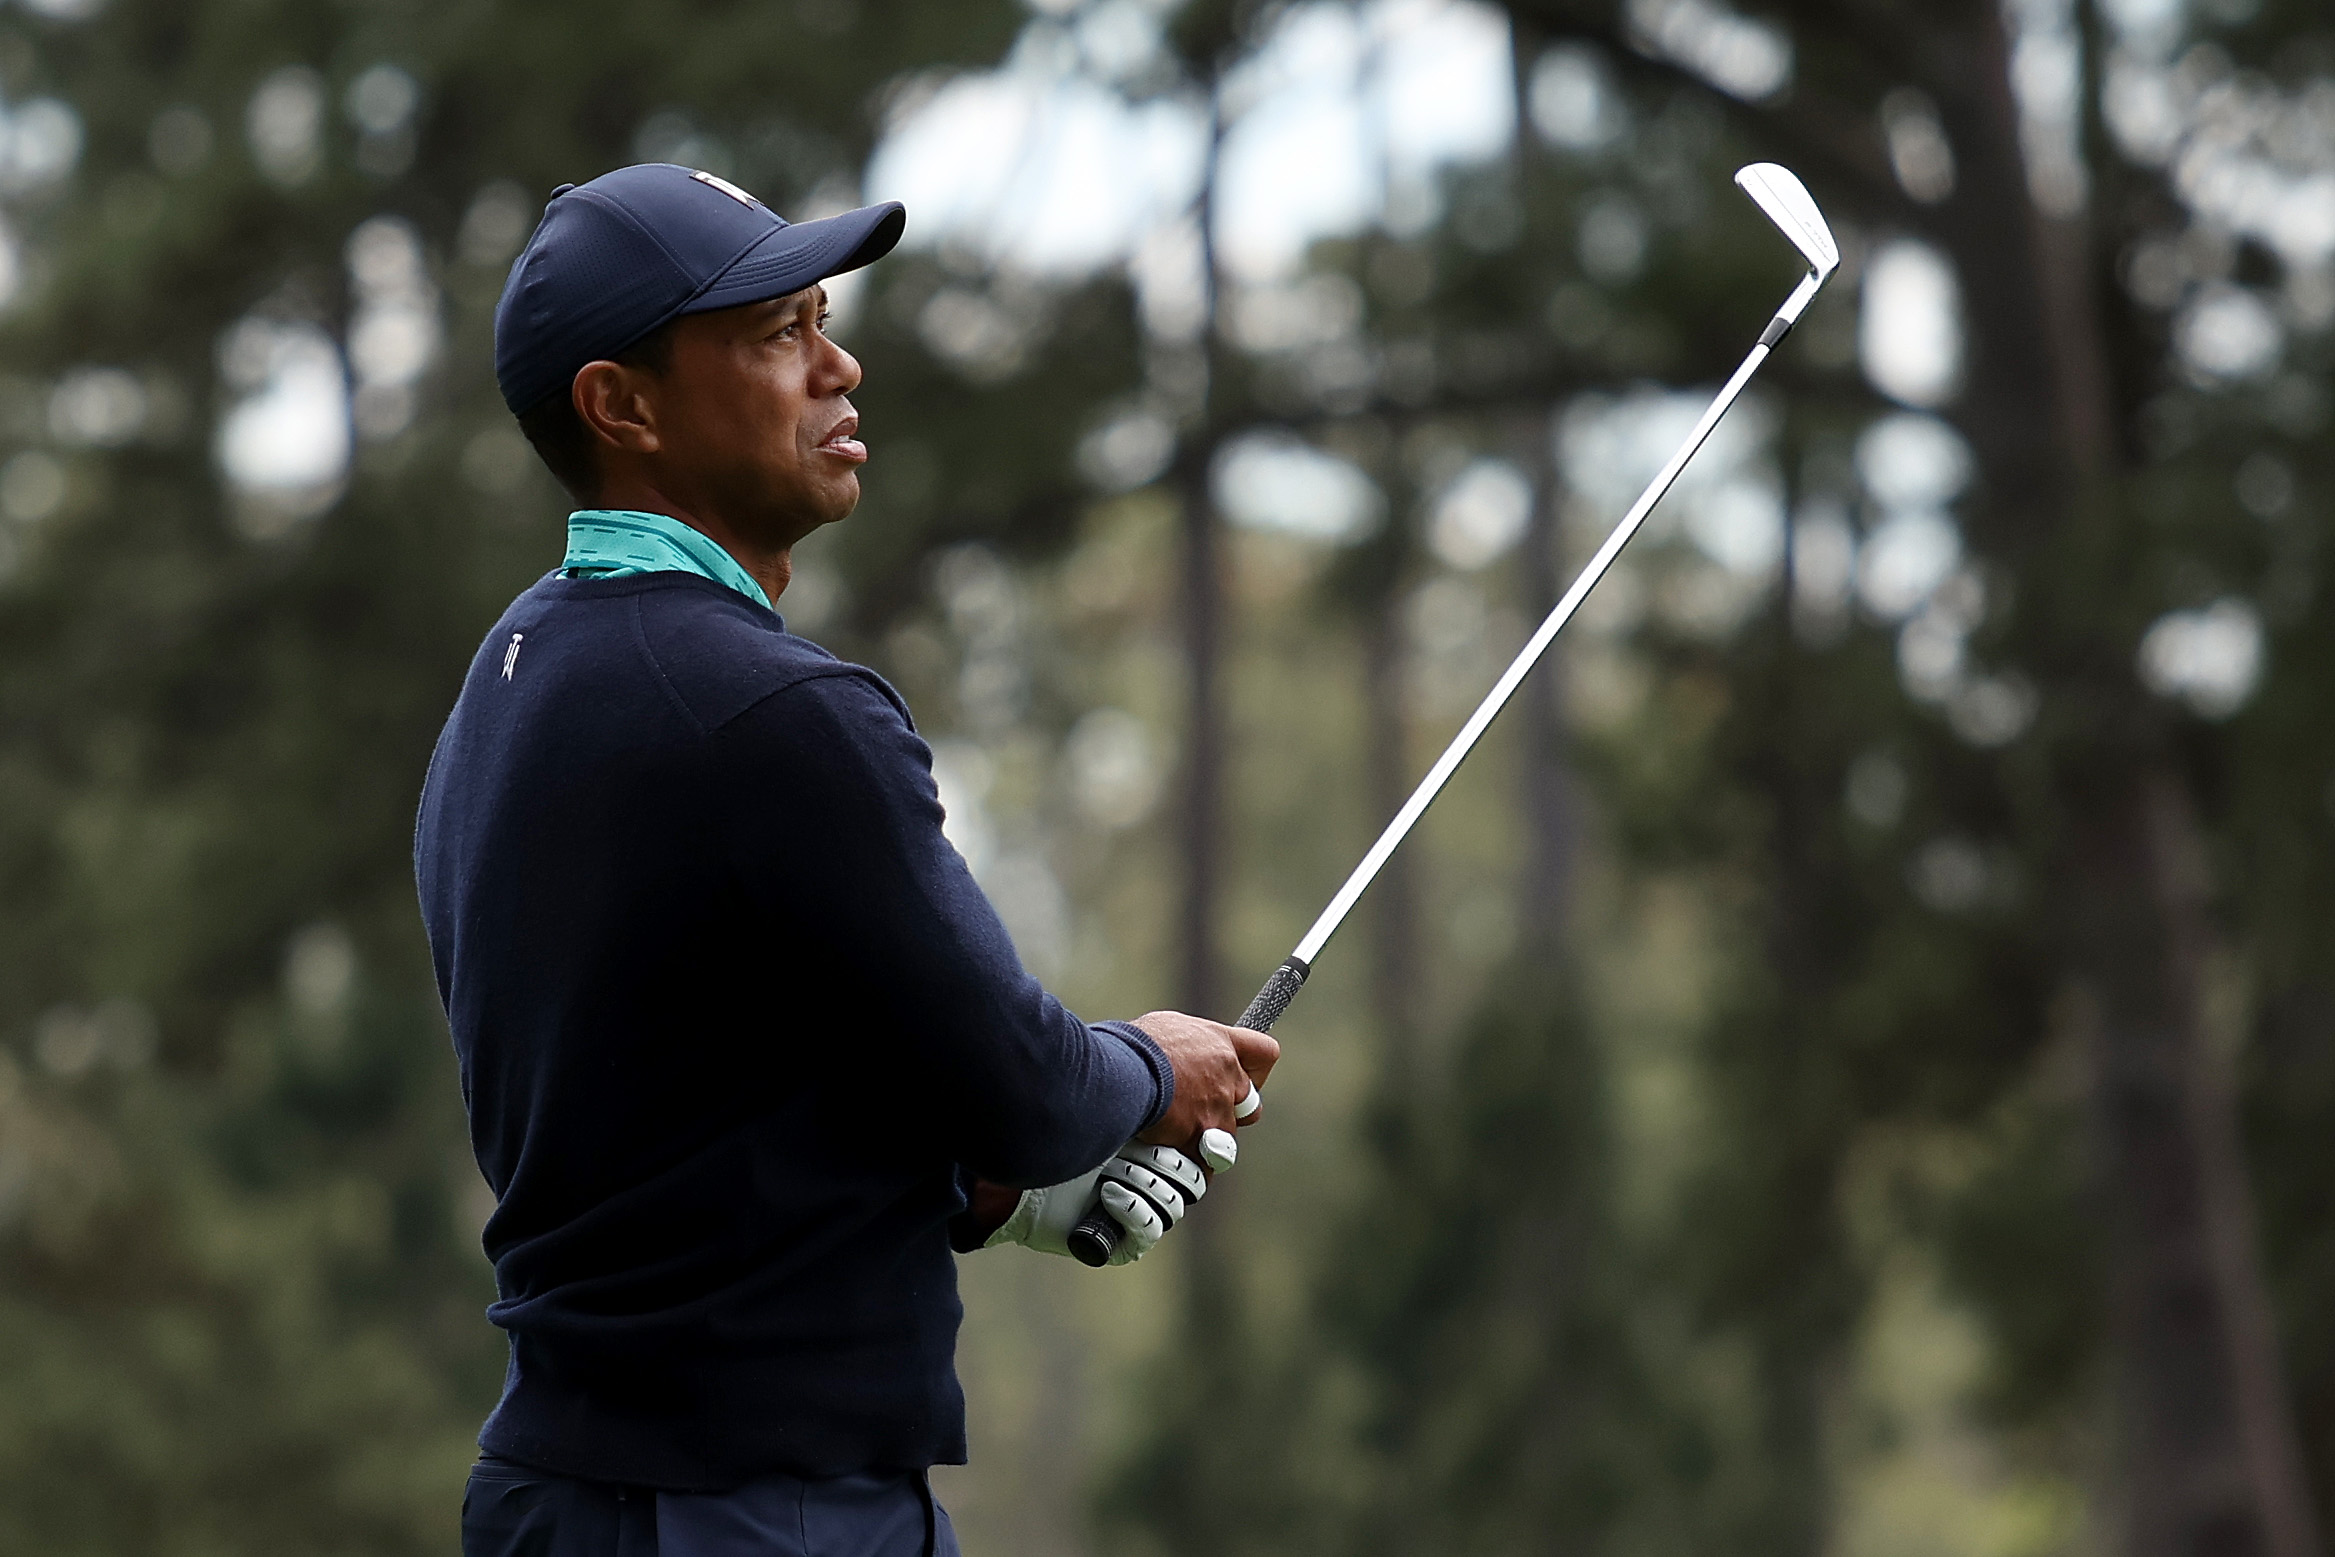 Tiger Woods Cards 2nd-Round 74 After Rocky Start, Makes Cut at 2022 Masters